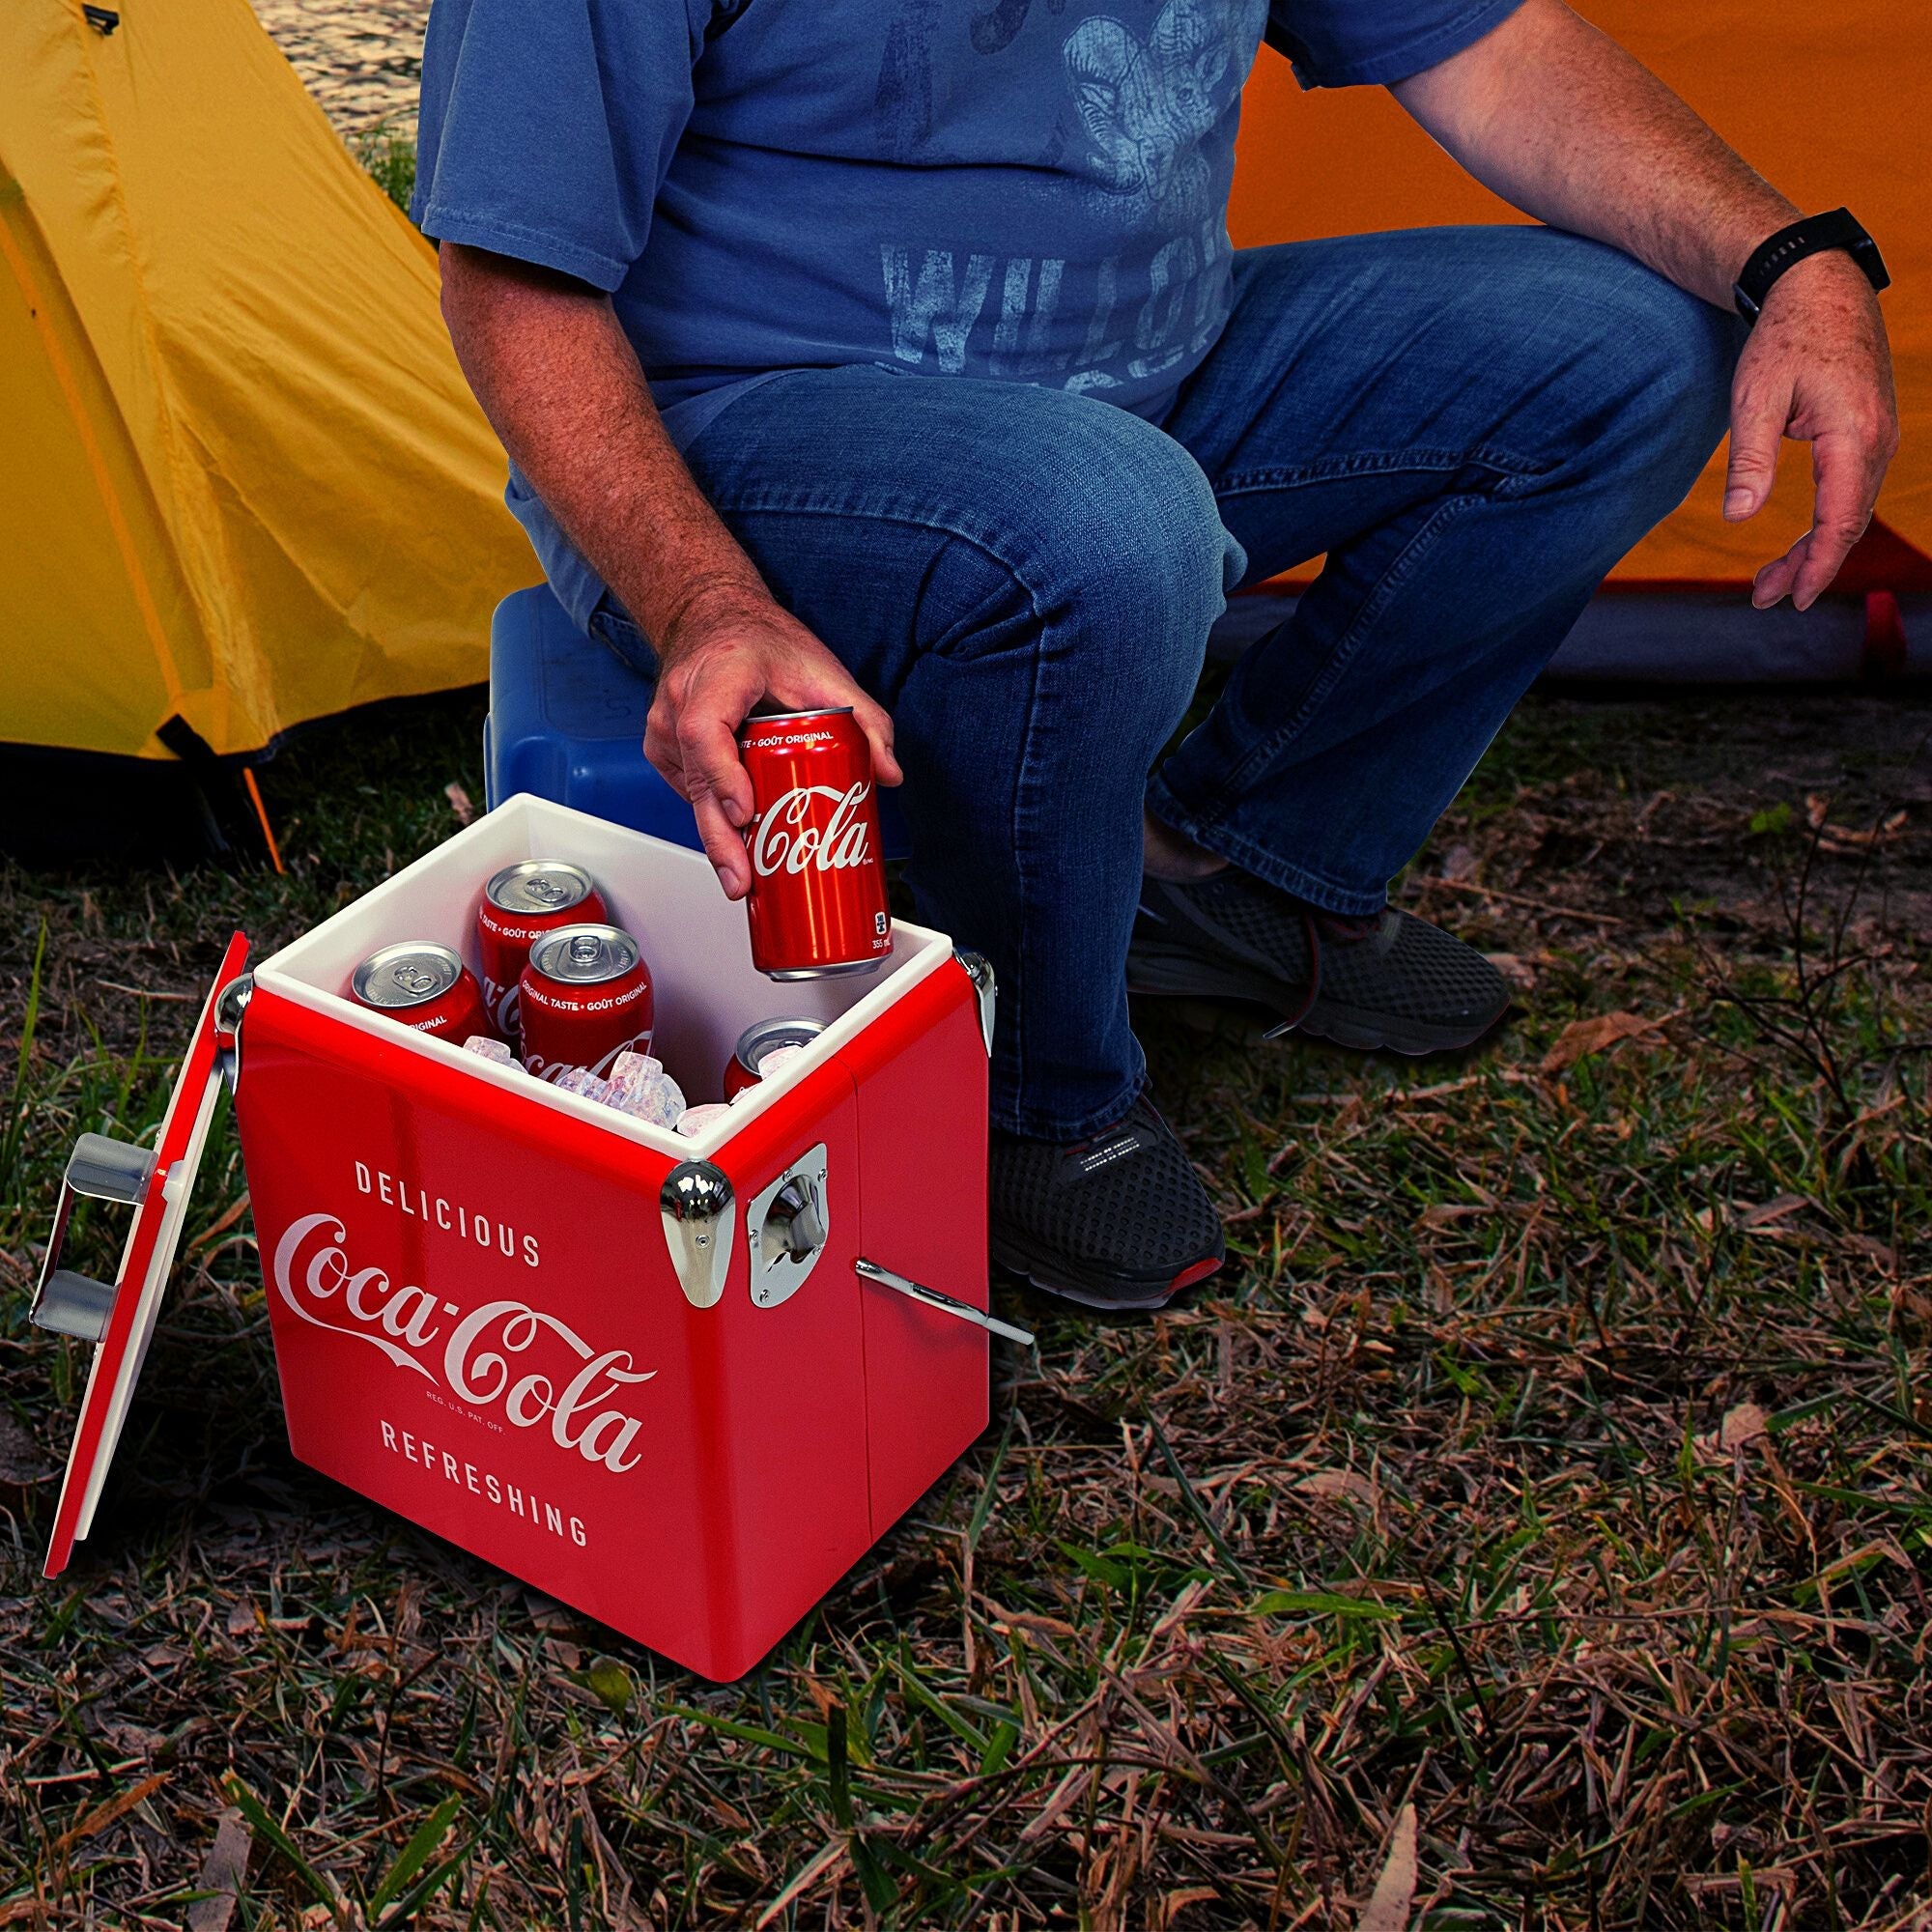 Lifestyle image of a person wearing jeans and a blue t-shirt sitting in front of two yellow dome tents and lifting a can of Coke out of the open the Coca-Cola retro ice chest